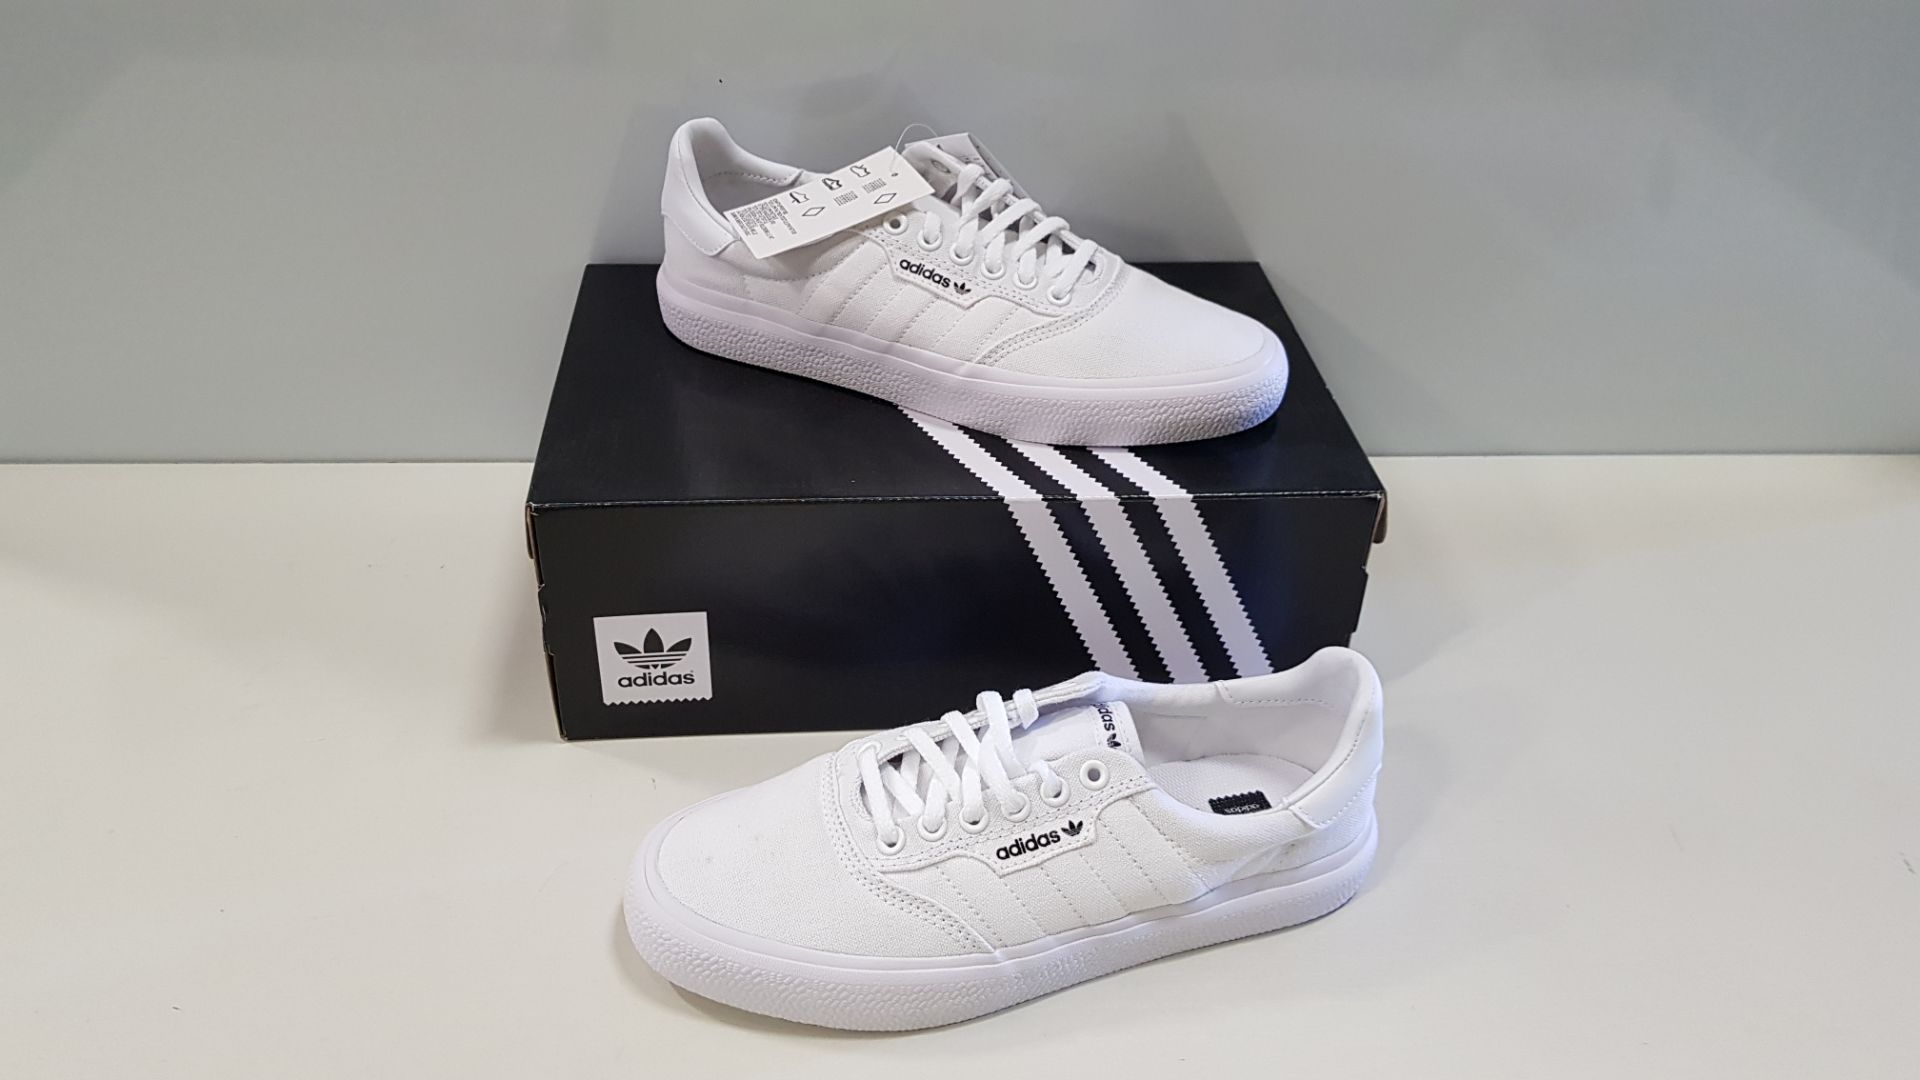 6 X BRAND NEW ADIDAS ORIGINALS TRIPLE WHITE 3MC TRAINERS UK SIZE 6.5 (PLEASE NOTE SOME SHOES ARE